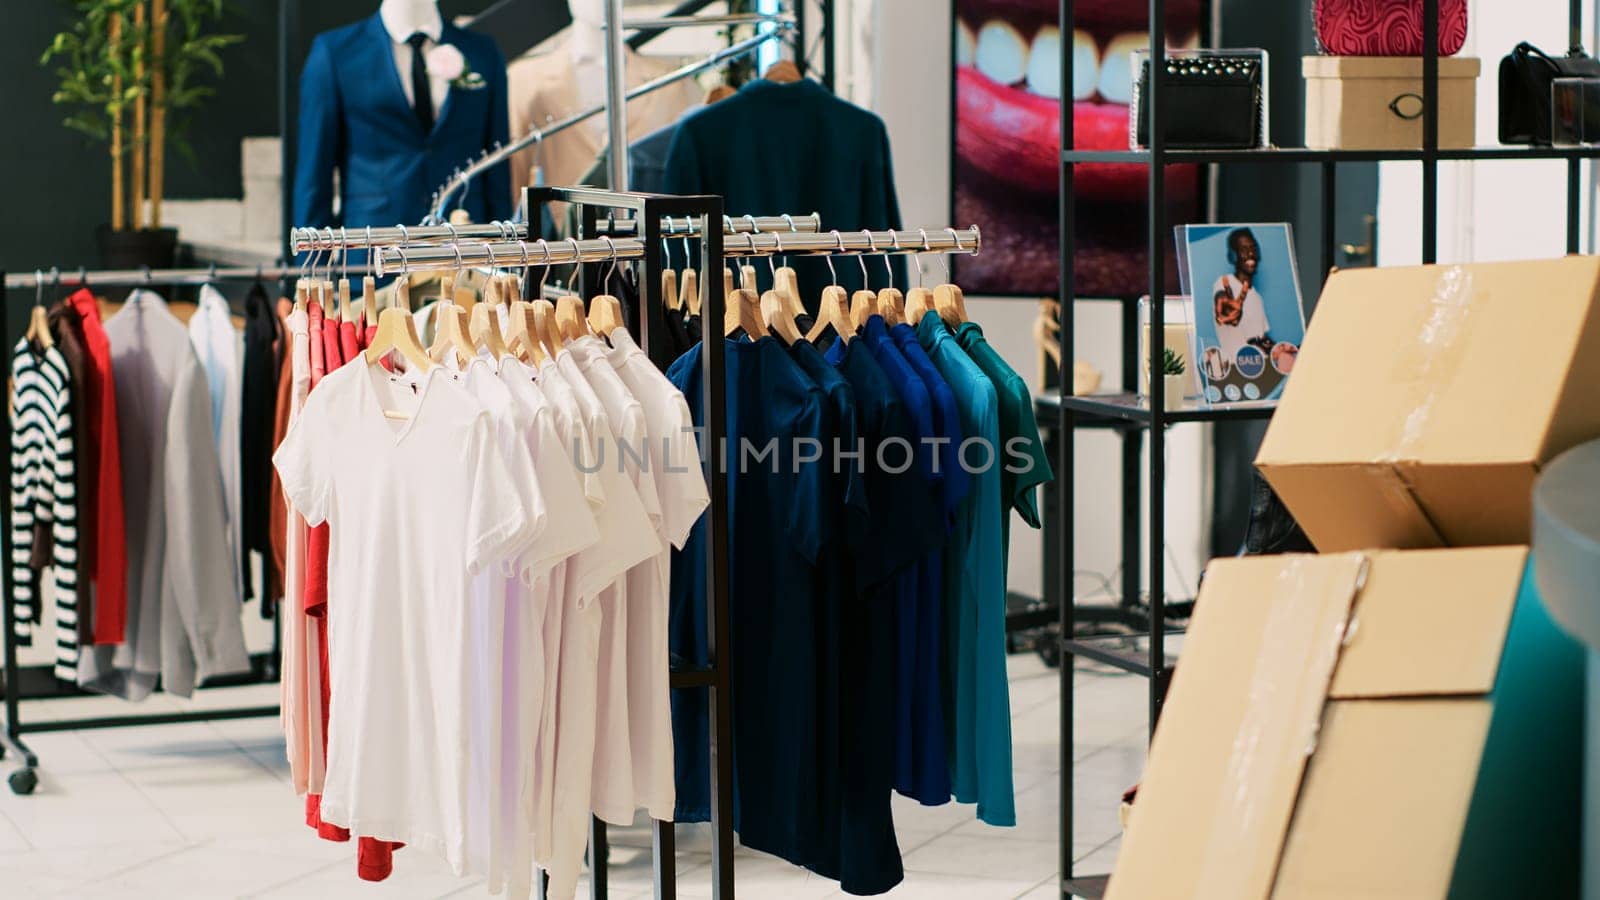 Empty shopping centre with casual and formal wear items, retail shop with stylish merchandise on hangers and racks. Clothing store inside with nobody in it, fashionable clothes and accessories.